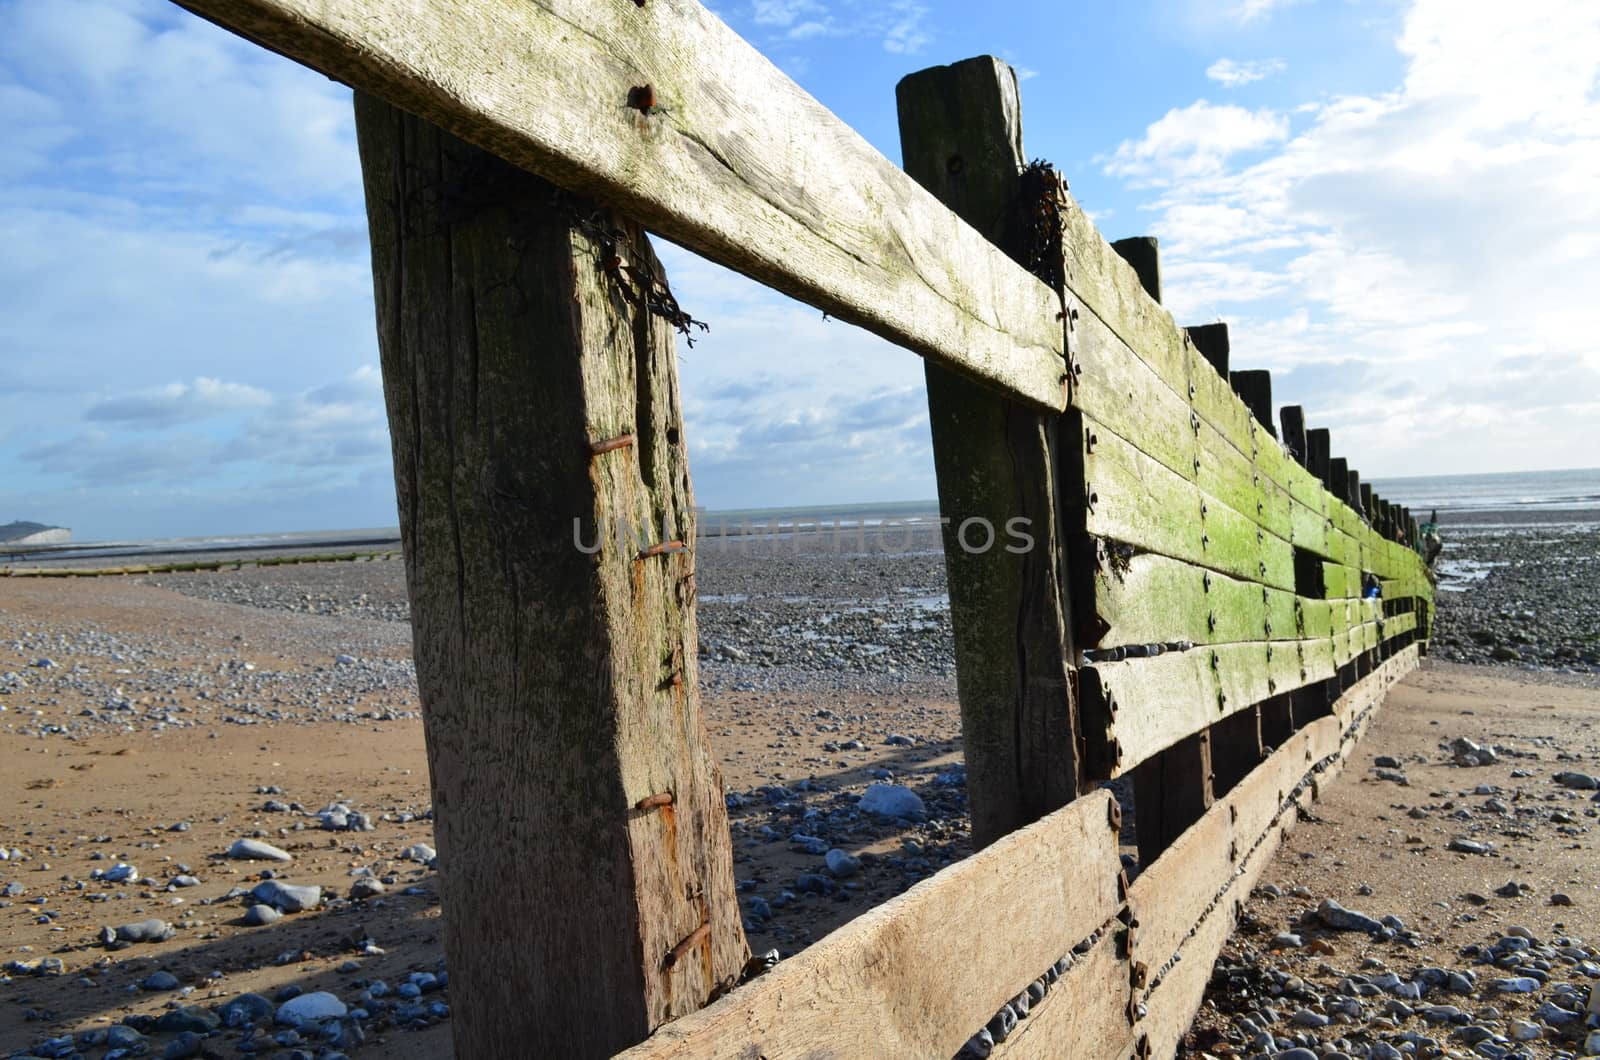 Wooden coastal sea defence breakwater along a stretch of beach in Sussex,England.